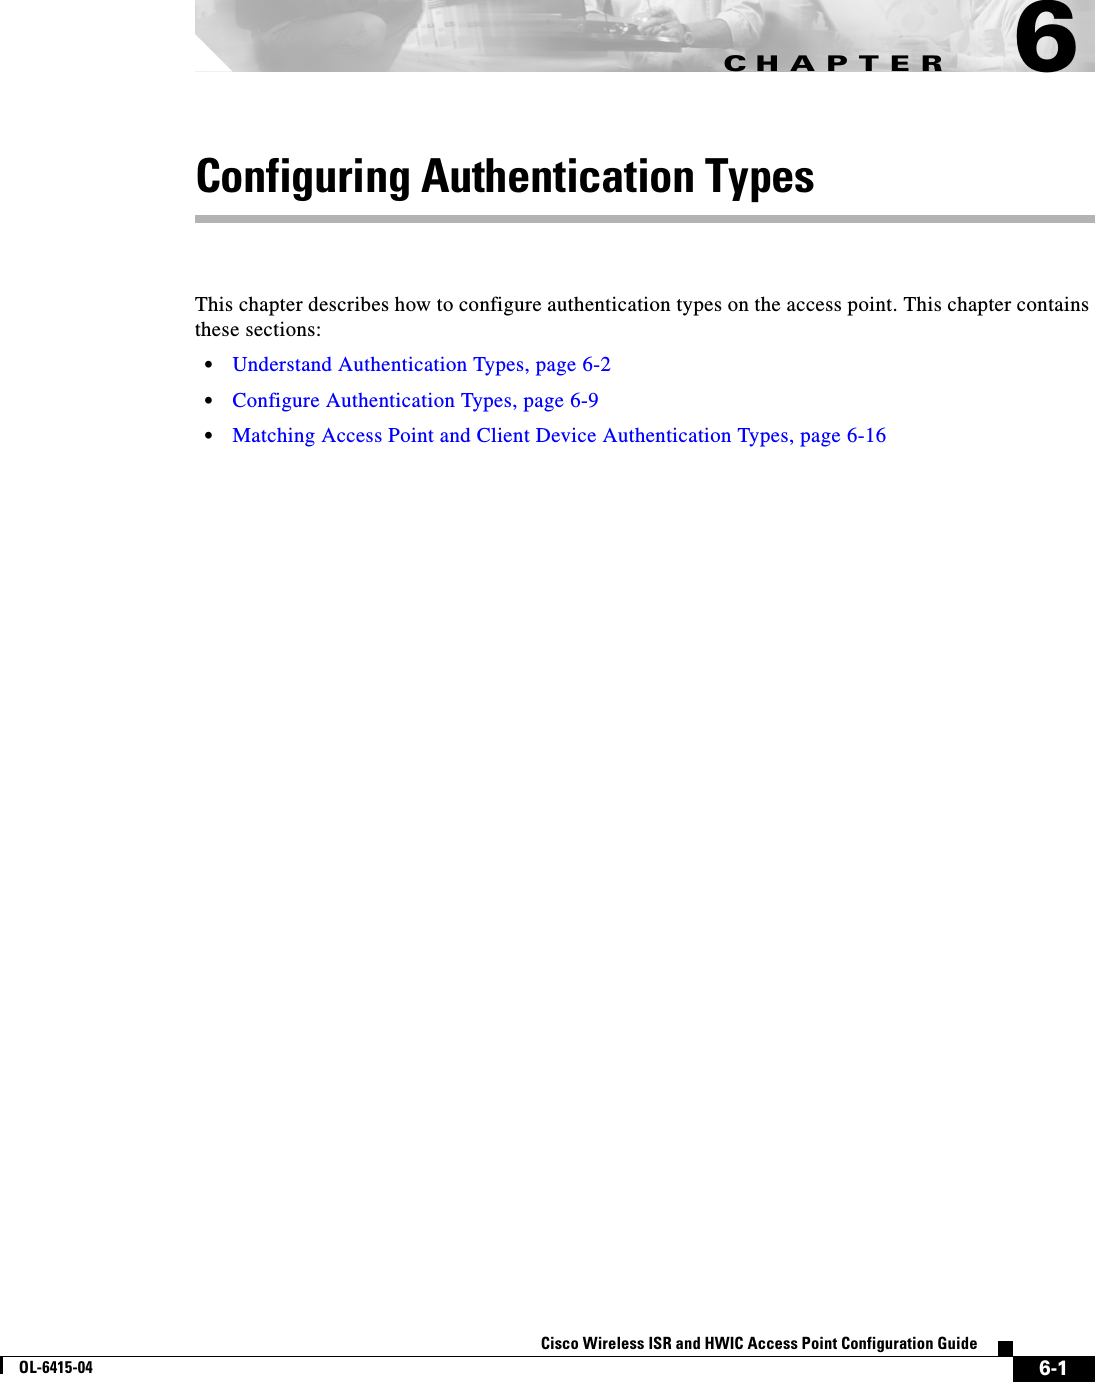 CHAPTER6-1Cisco Wireless ISR and HWIC Access Point Configuration GuideOL-6415-046Configuring Authentication TypesThis chapter describes how to configure authentication types on the access point. This chapter contains these sections:  • Understand Authentication Types, page 6-2  • Configure Authentication Types, page 6-9  • Matching Access Point and Client Device Authentication Types, page 6-16